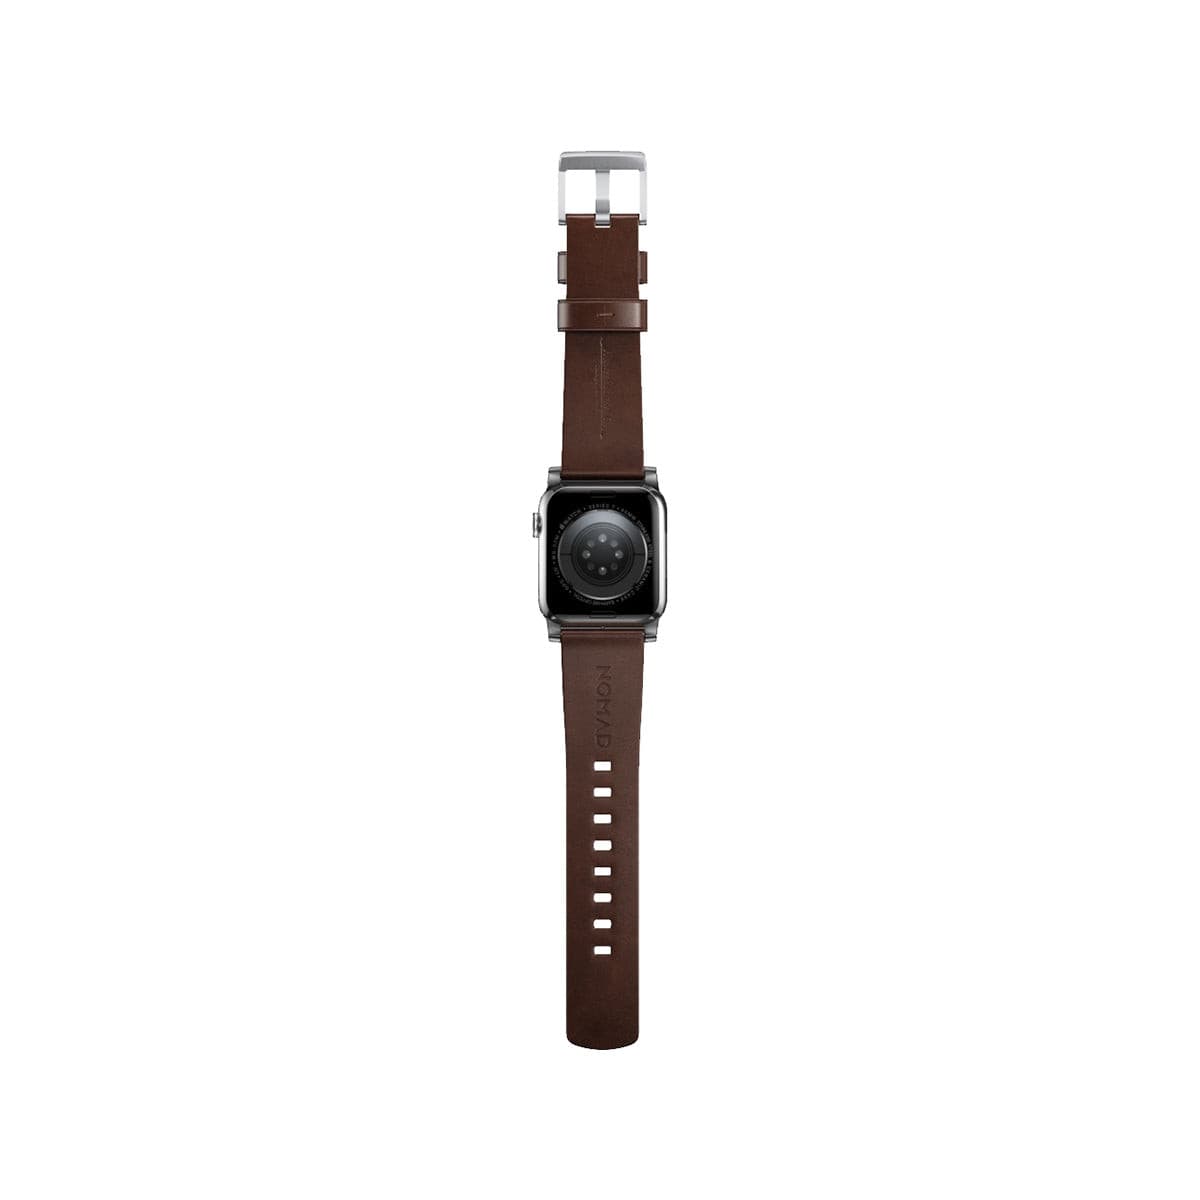 NOMAD Apple Watch Modern Band 45mm - Silver Hardware with Rustic Brown Horween Leather Strap.